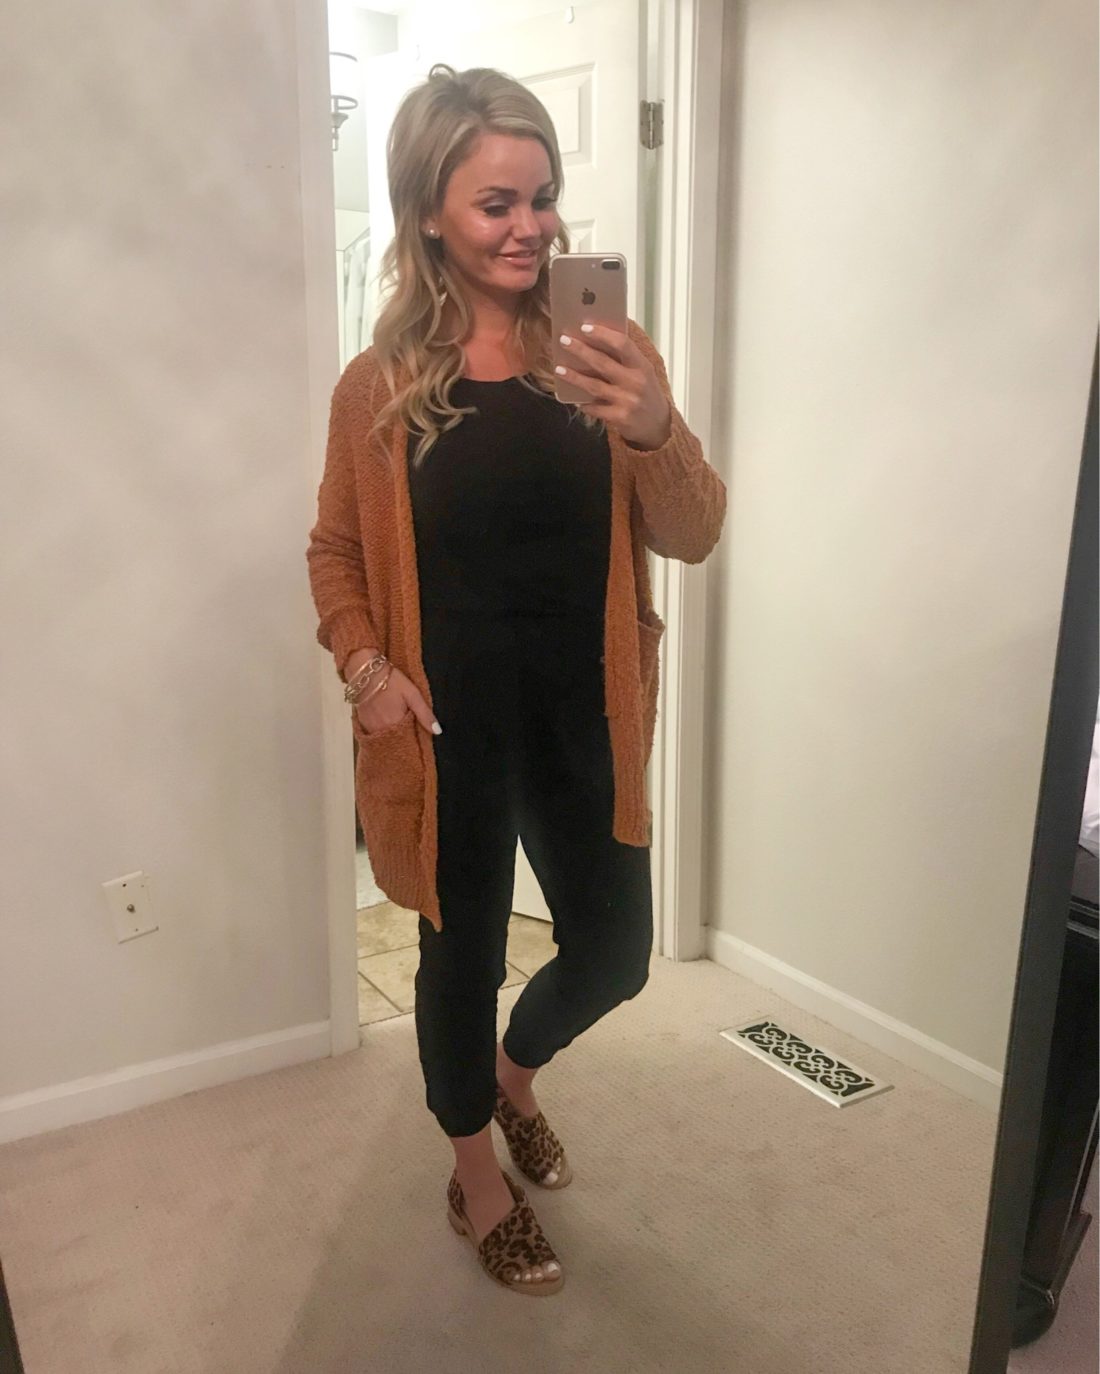 Amazon Fashion Finds for Fall - How to Style a Jumpsuit